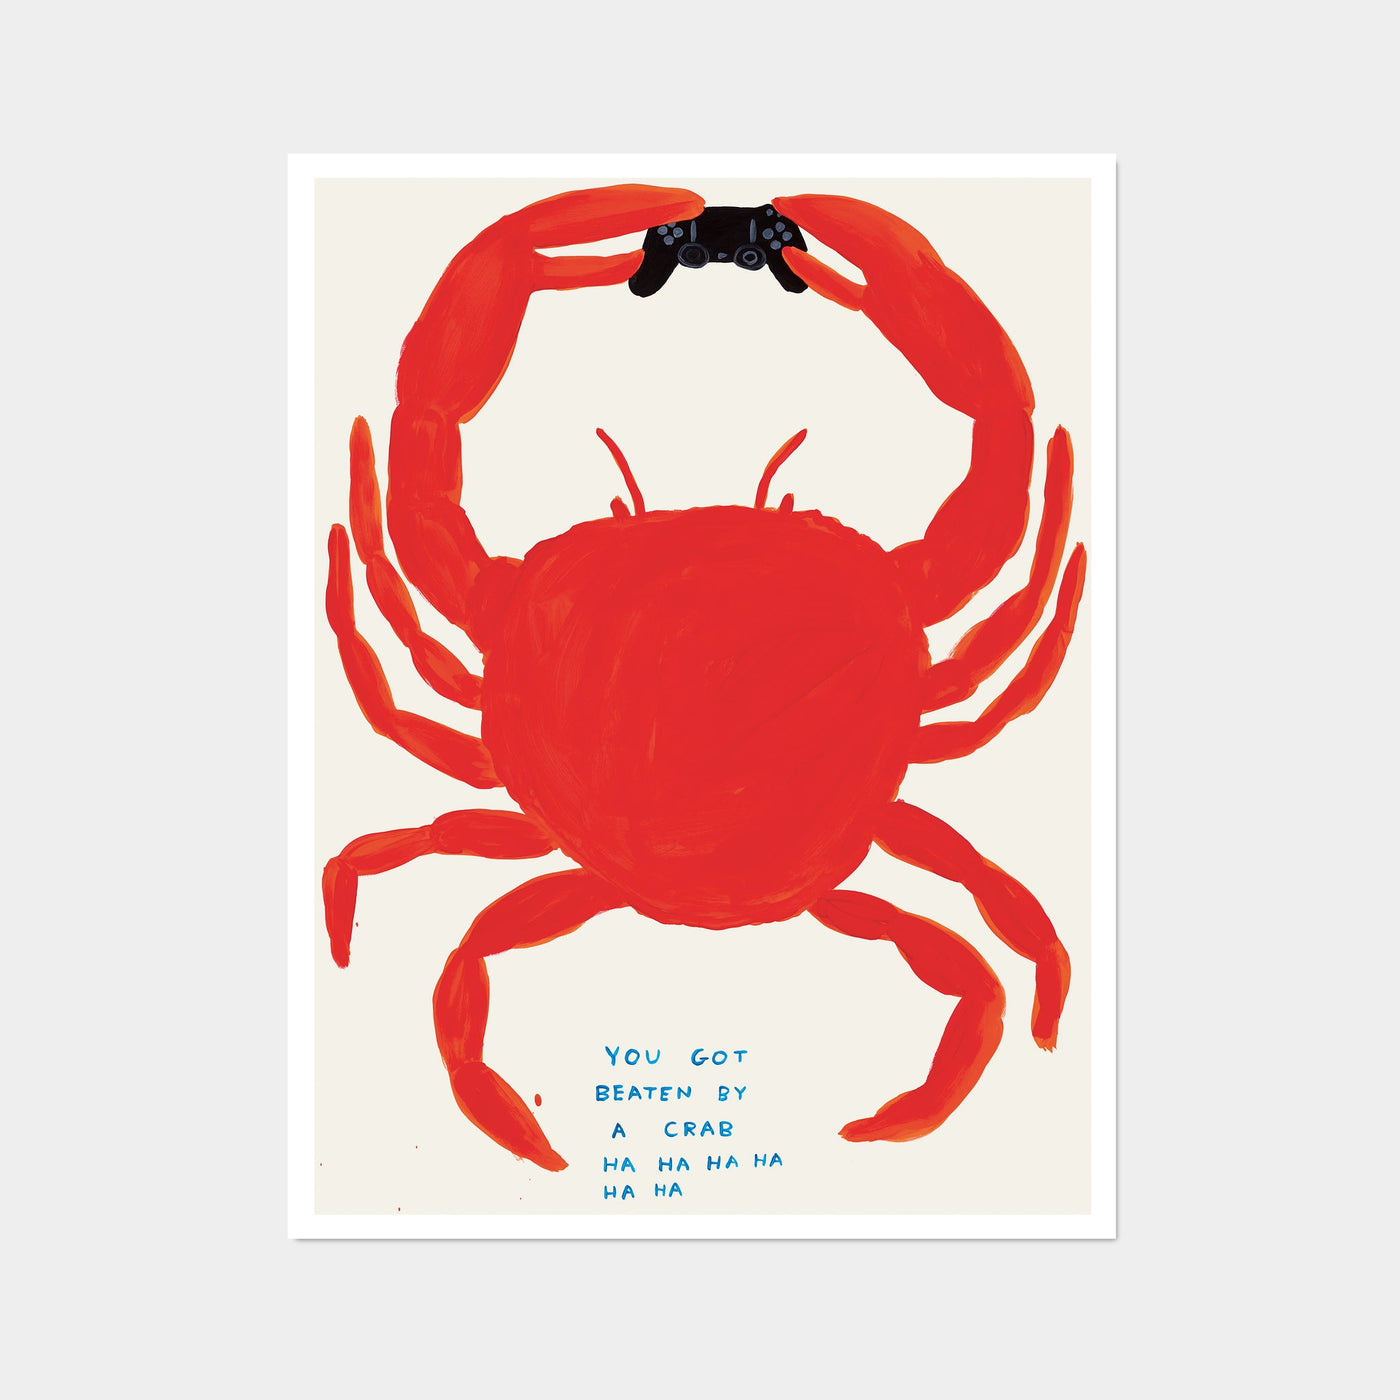 "You Got Beaten By A Crab" Poster